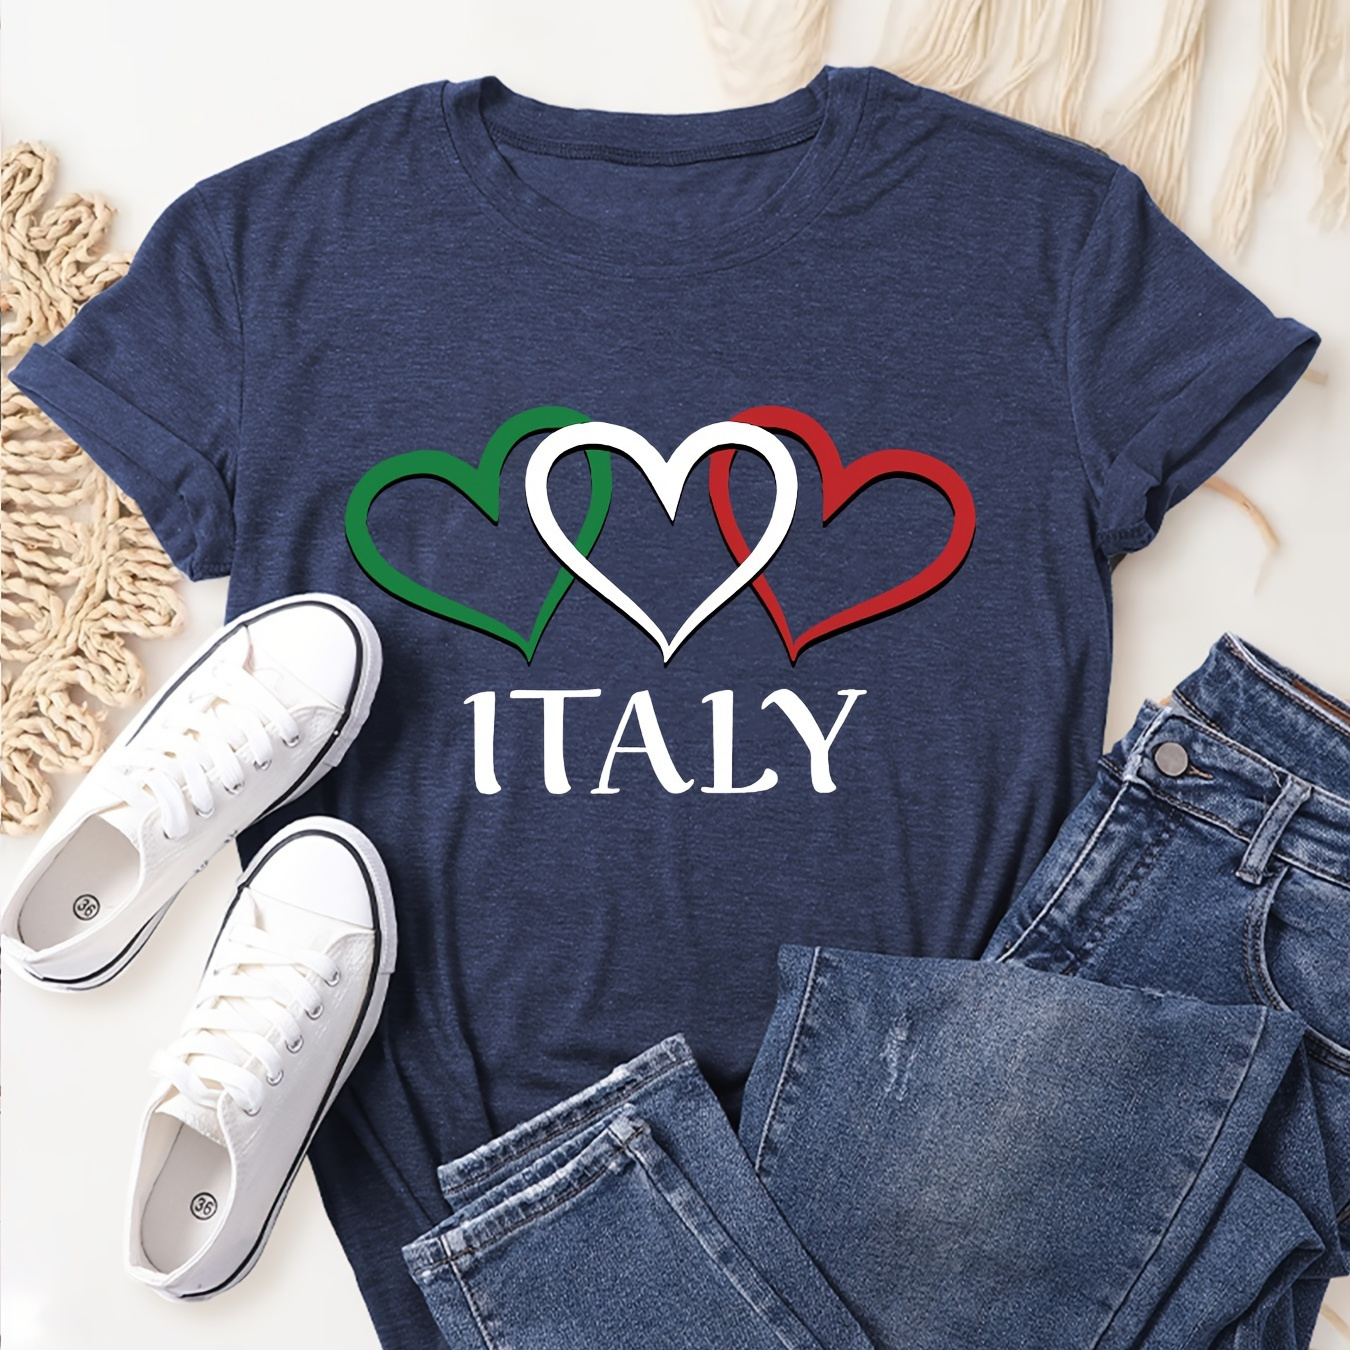 

Italy & Heart Print T-shirt, Short Sleeve Crew Neck Casual Top For Summer & Spring, Women's Clothing